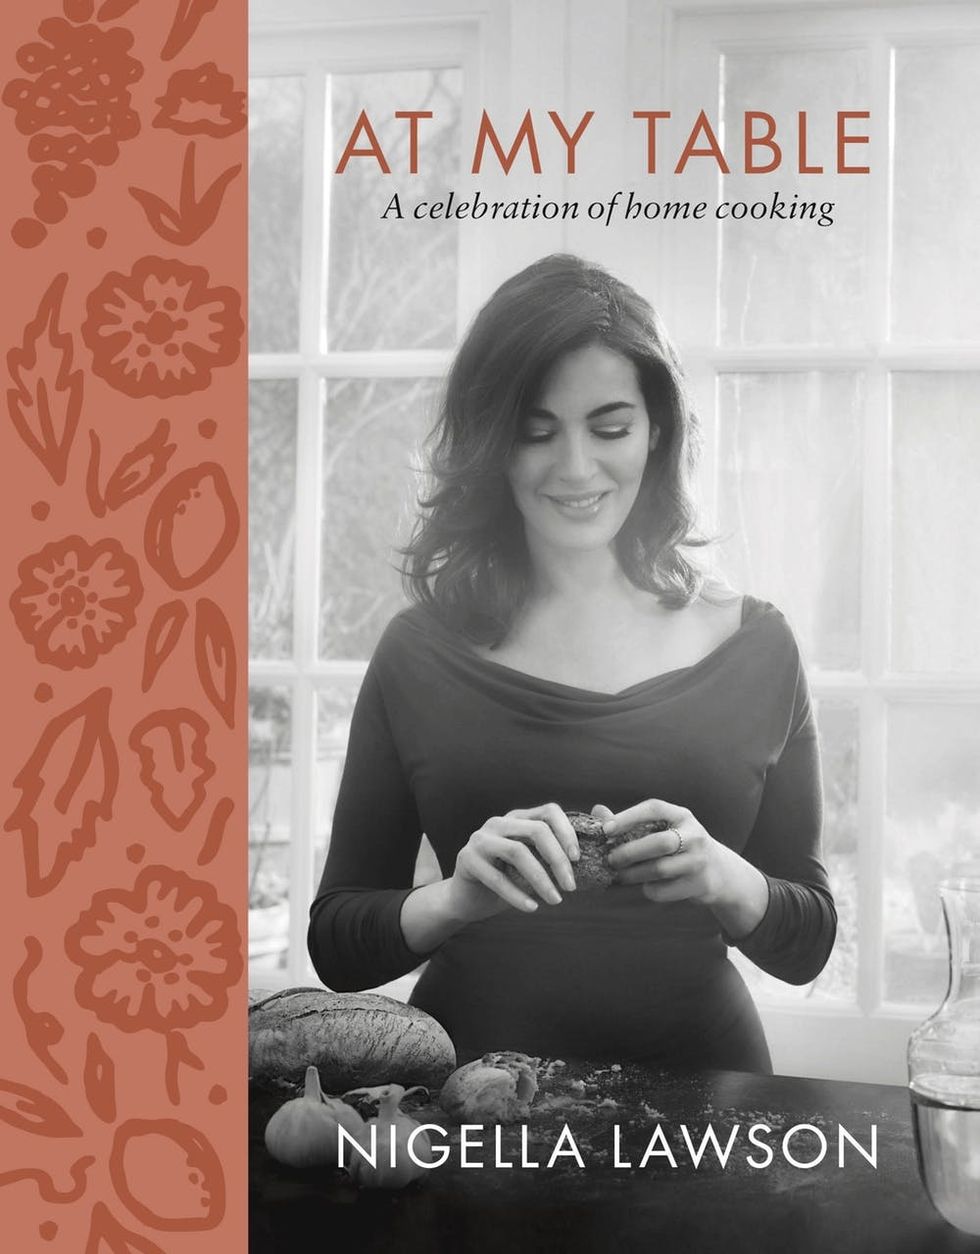 In the AT MY TABLE cookbook review, we look at Nigella Lawson's latest book and drool over two recipes from the book.